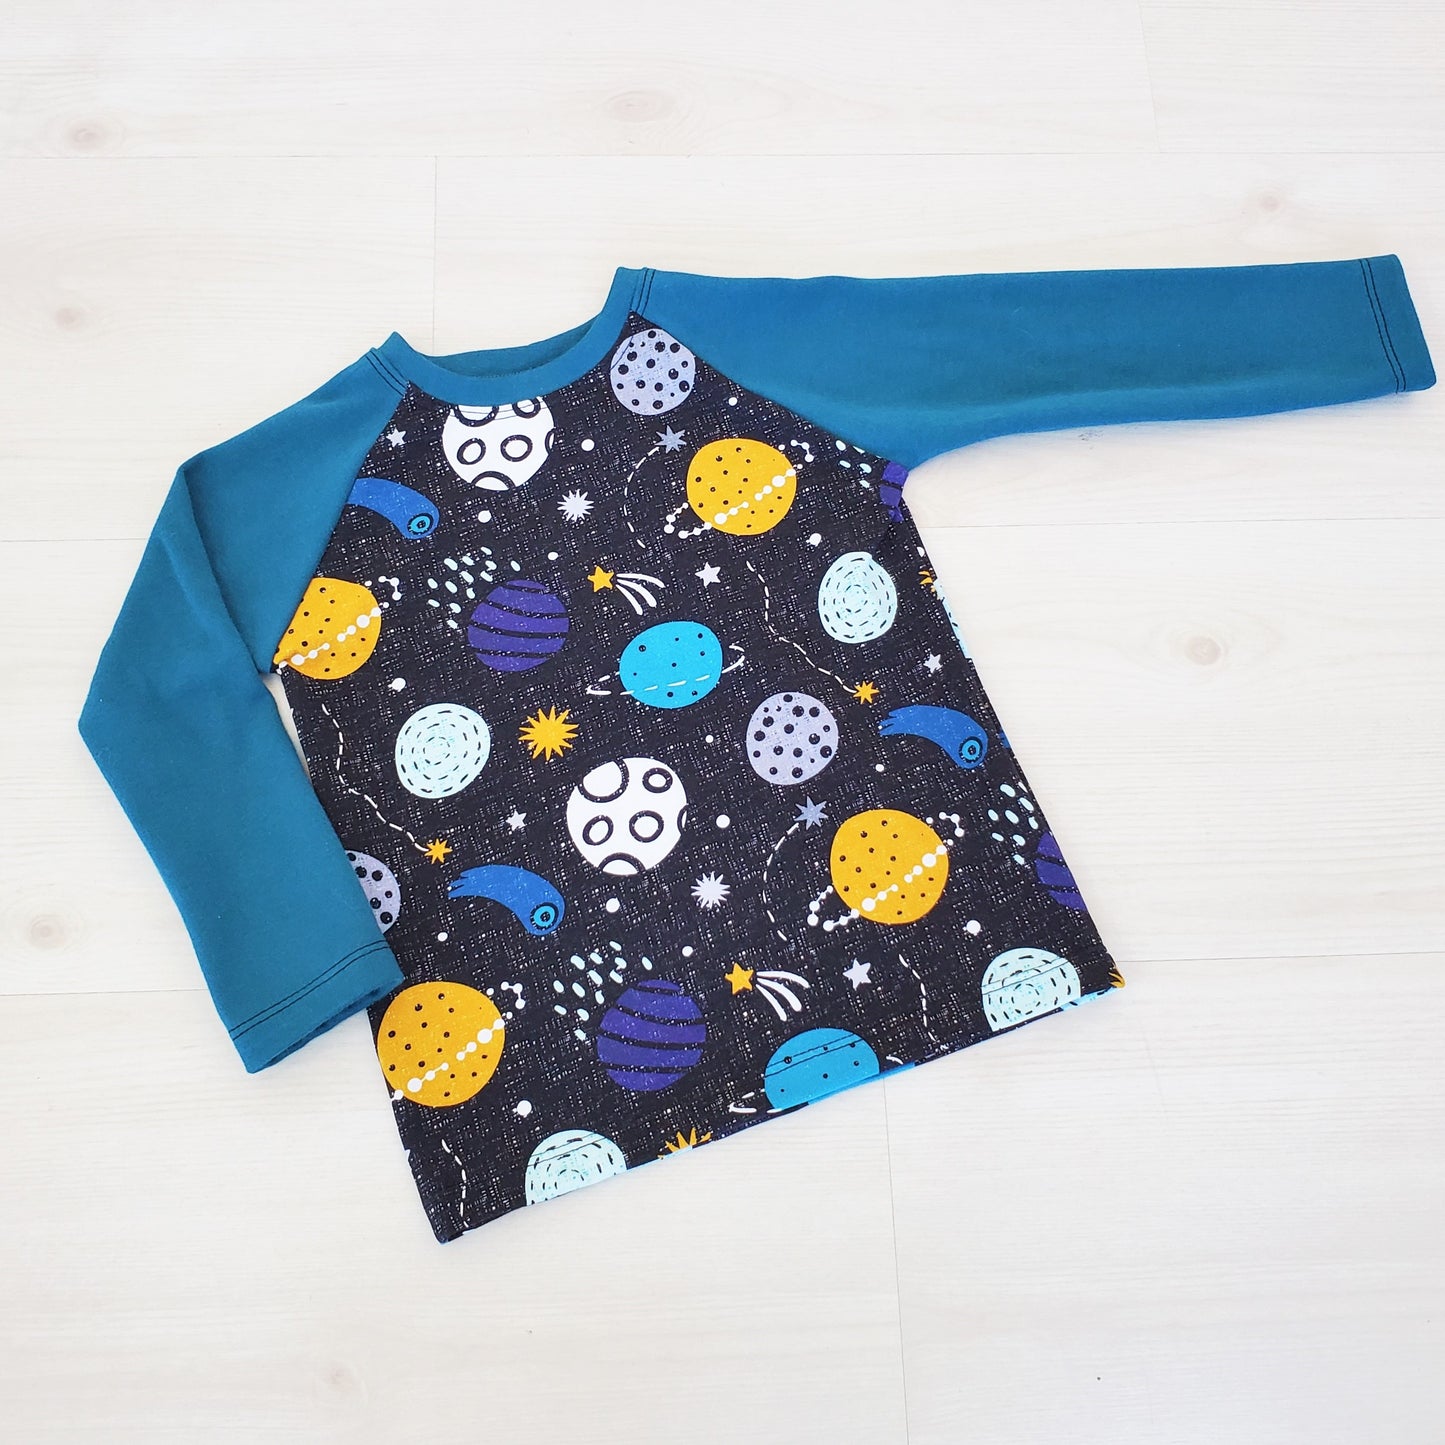 Space Themed Long-Sleeved Tee Shirt in Organic Cotton